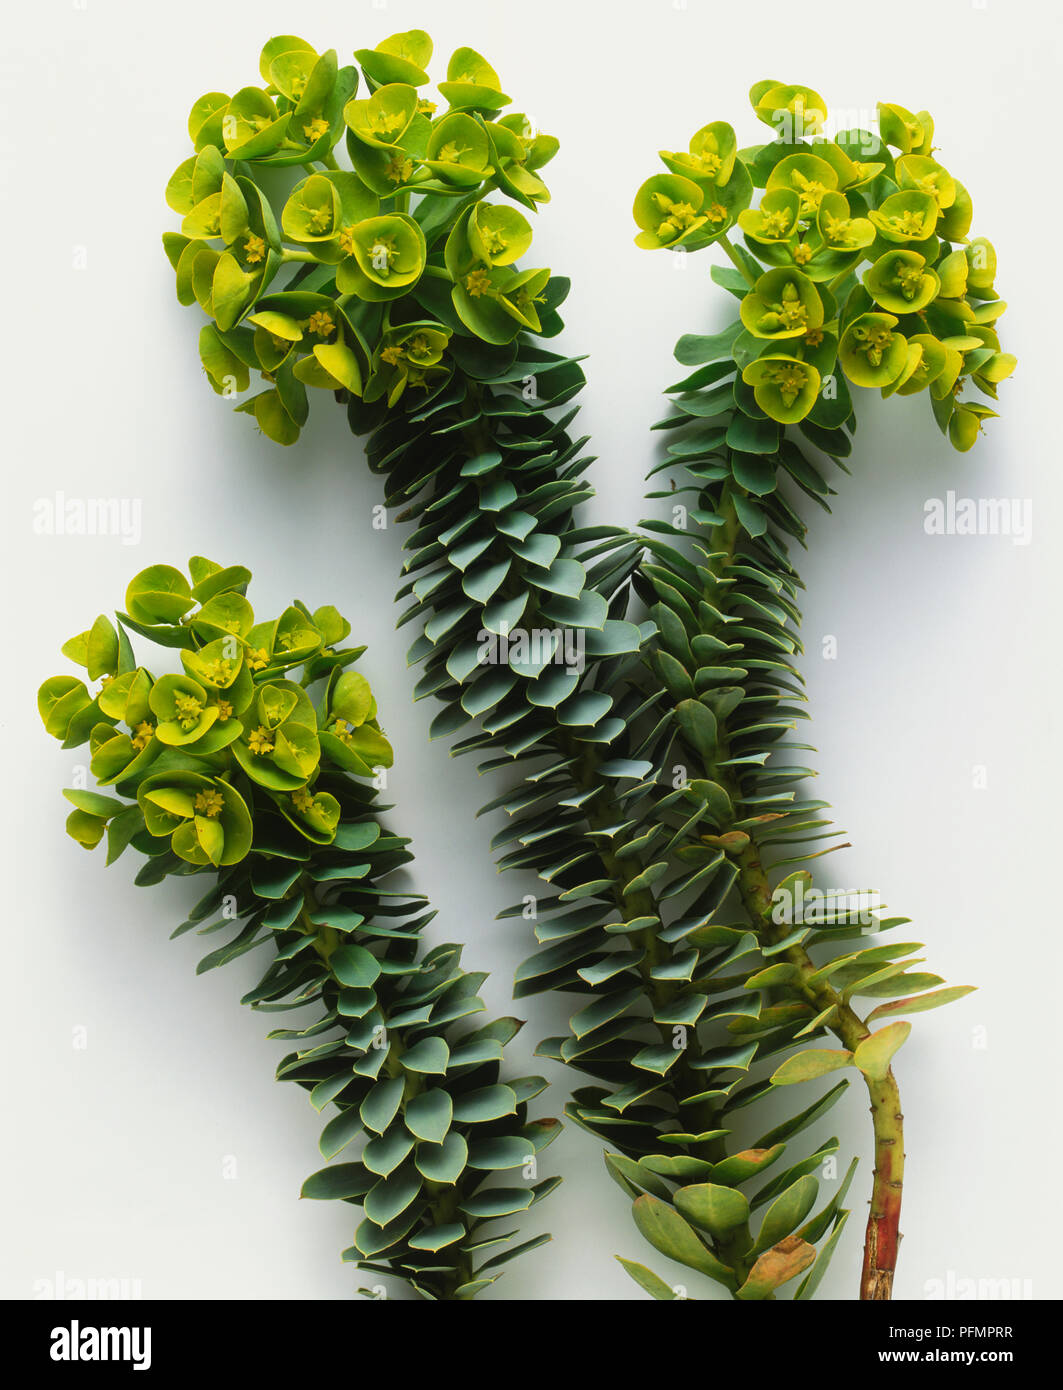 Euphorbia myrsinites, an evergreen perennial with small pointed leaves carried in spirals around the prostrate stems with vivid yellow flowers. Stock Photo